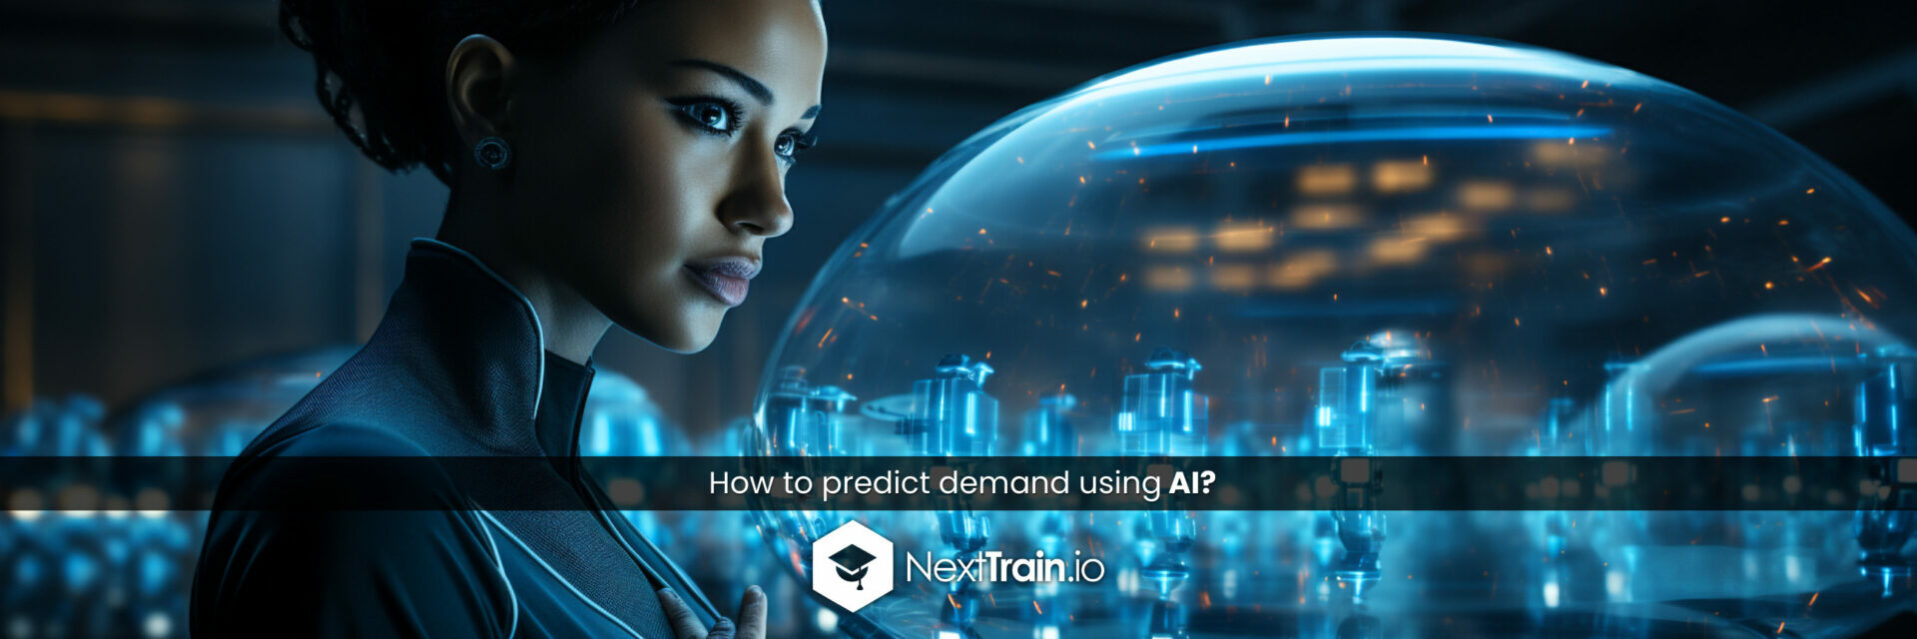 How to predict demand using AI?